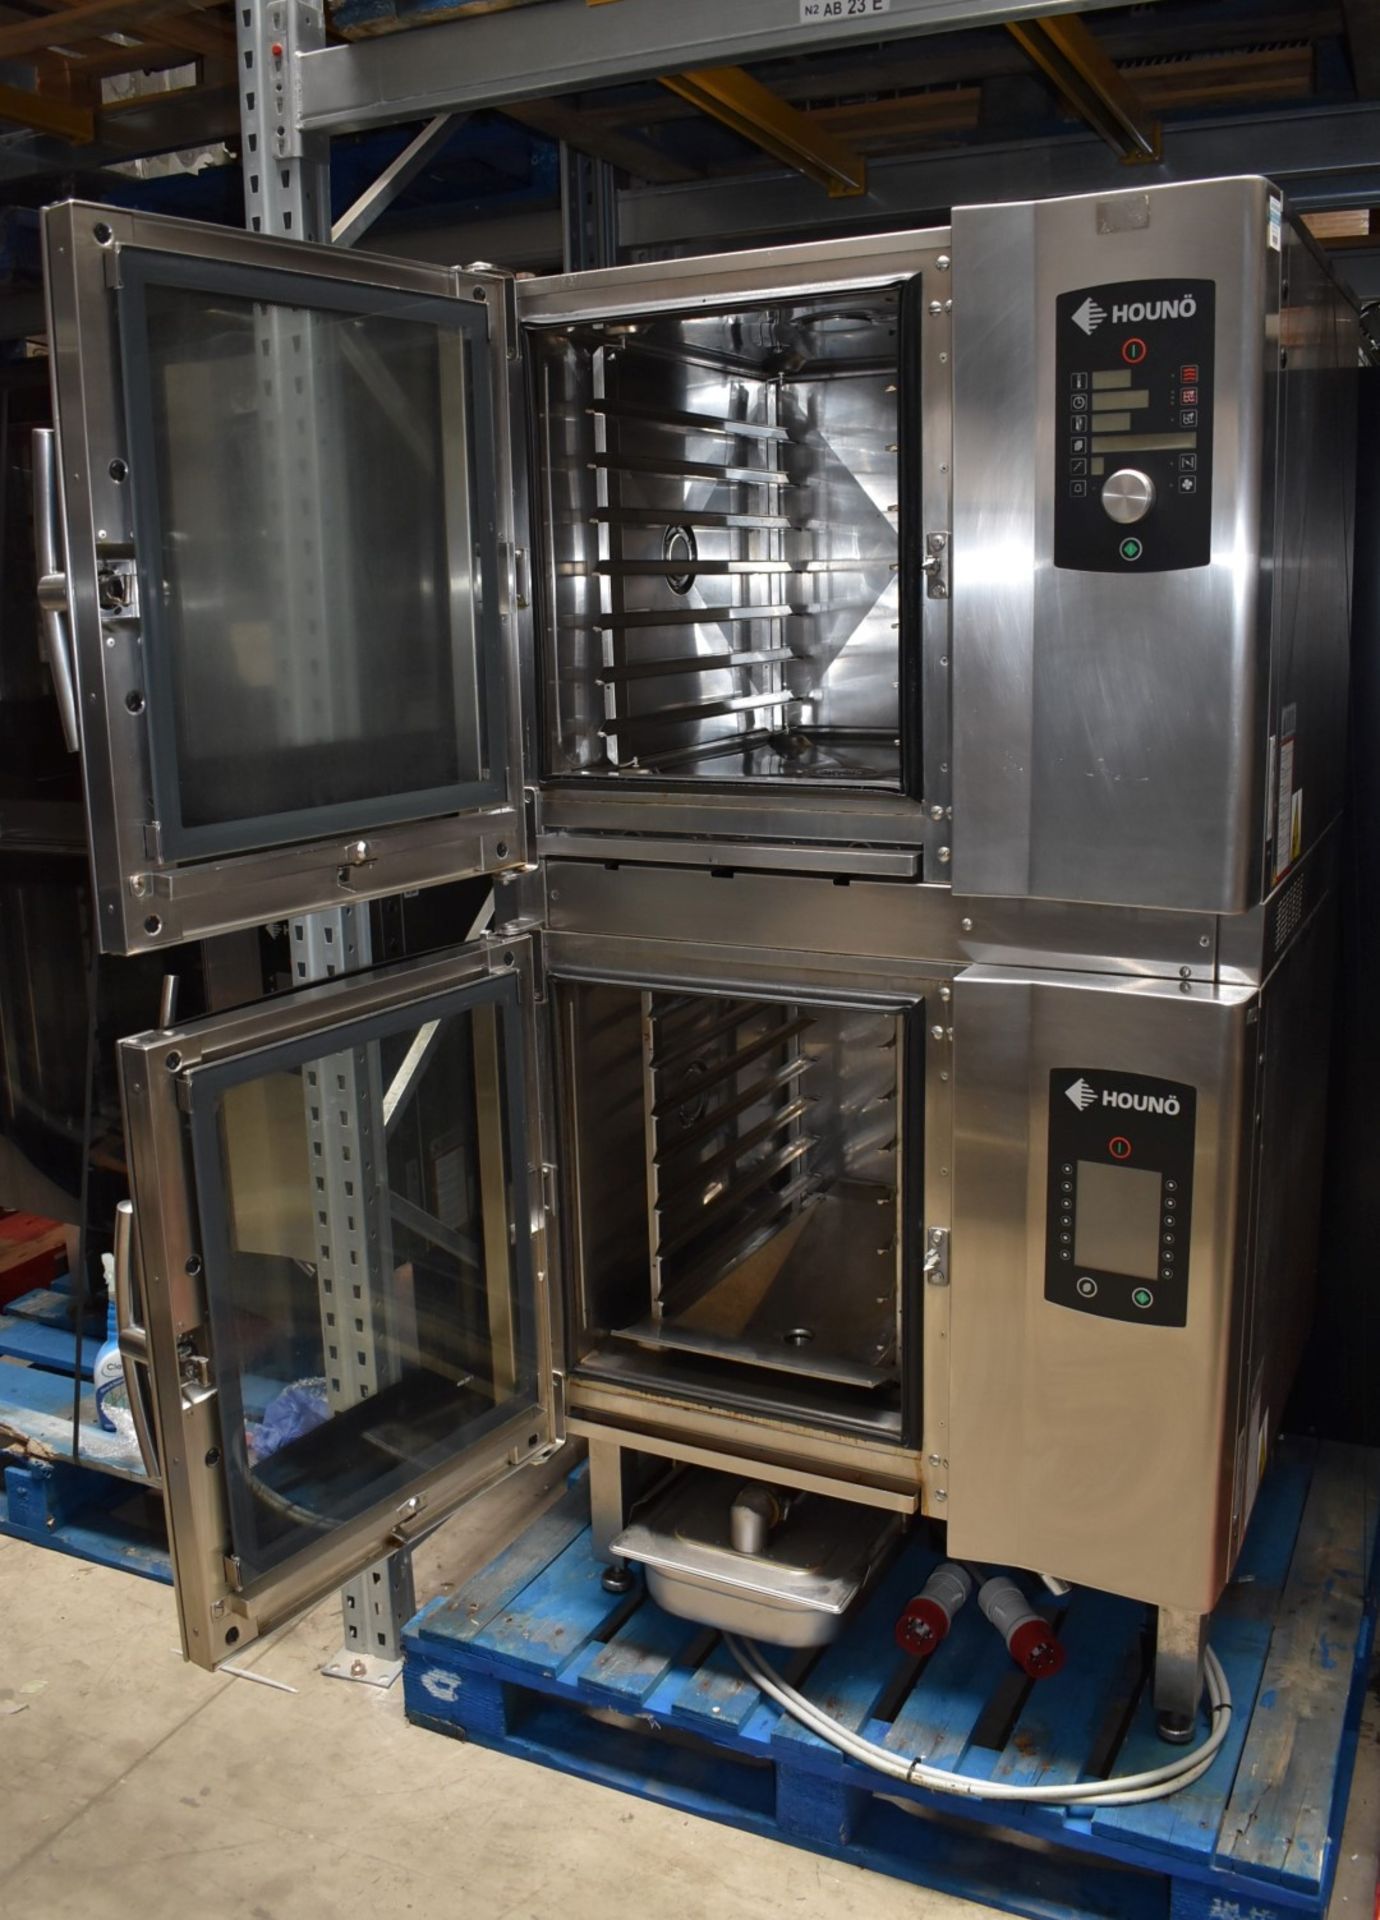 1 x Houno Double 6 Grid Stacked Combi Oven - Model: C 1.06 / CPE 1.06 - 3 Phase - Image 5 of 21